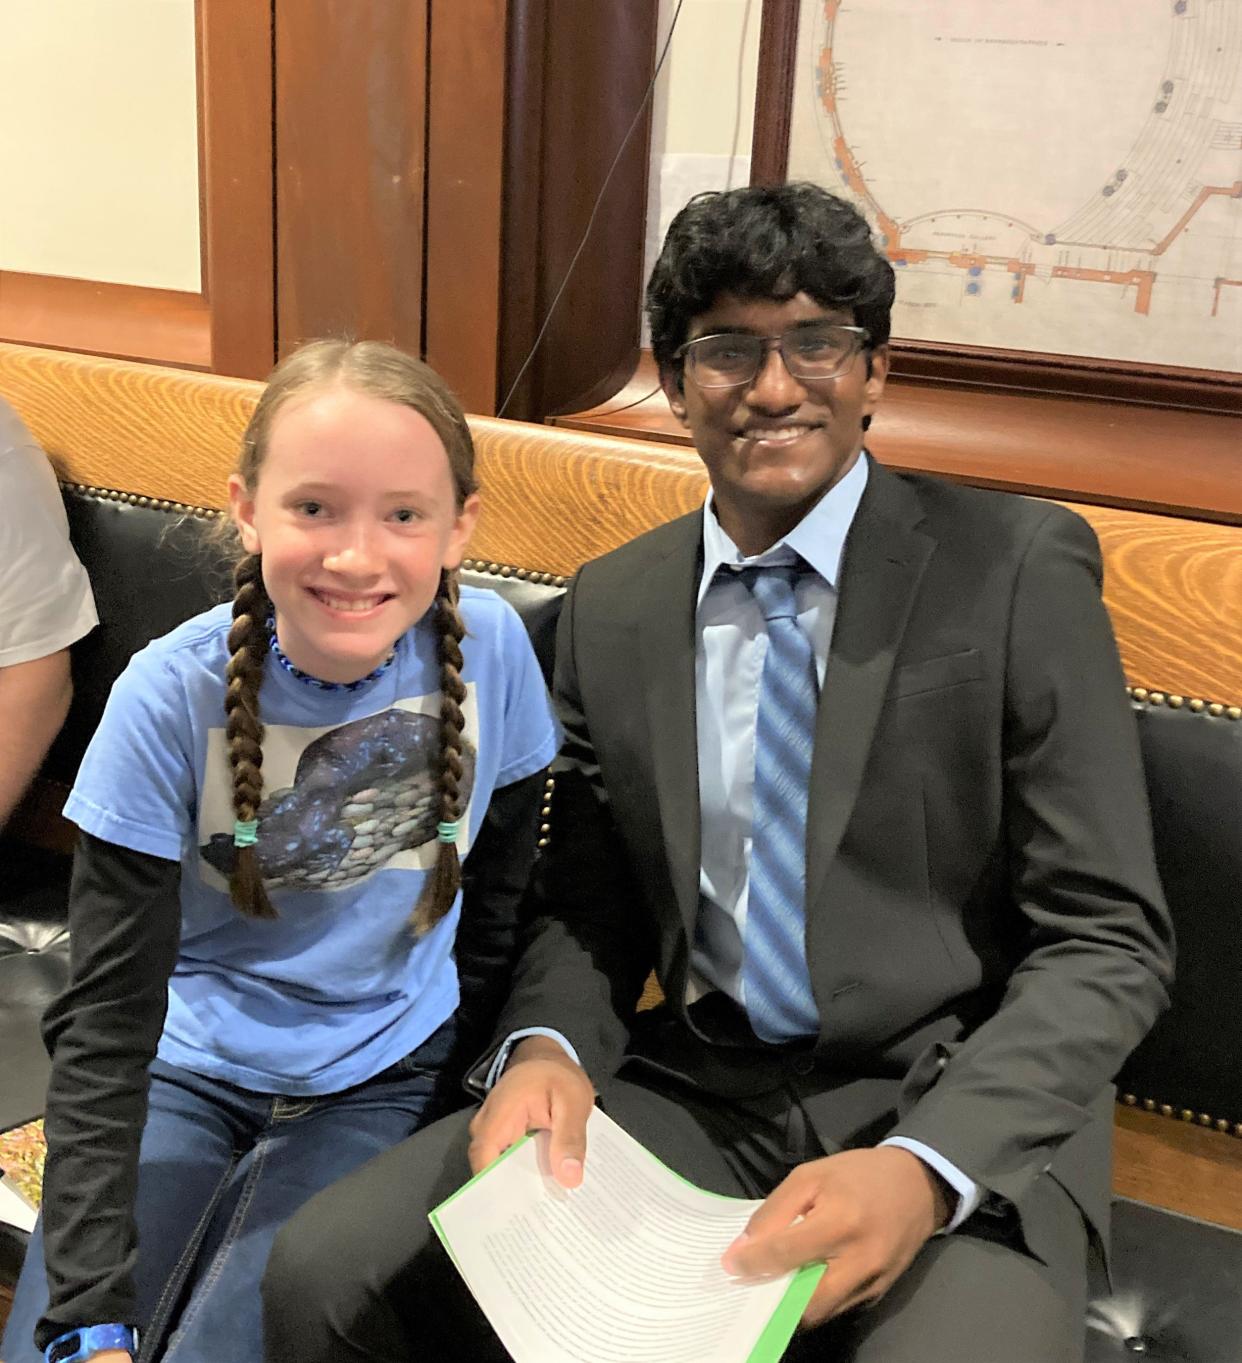 Semona Peet, a fifth-grader from Southborough, left and Sriniketh Velagapudi, a high school student from Andover, are proposing the state adopted the endangered blue spotted salamander as the state amphibian.